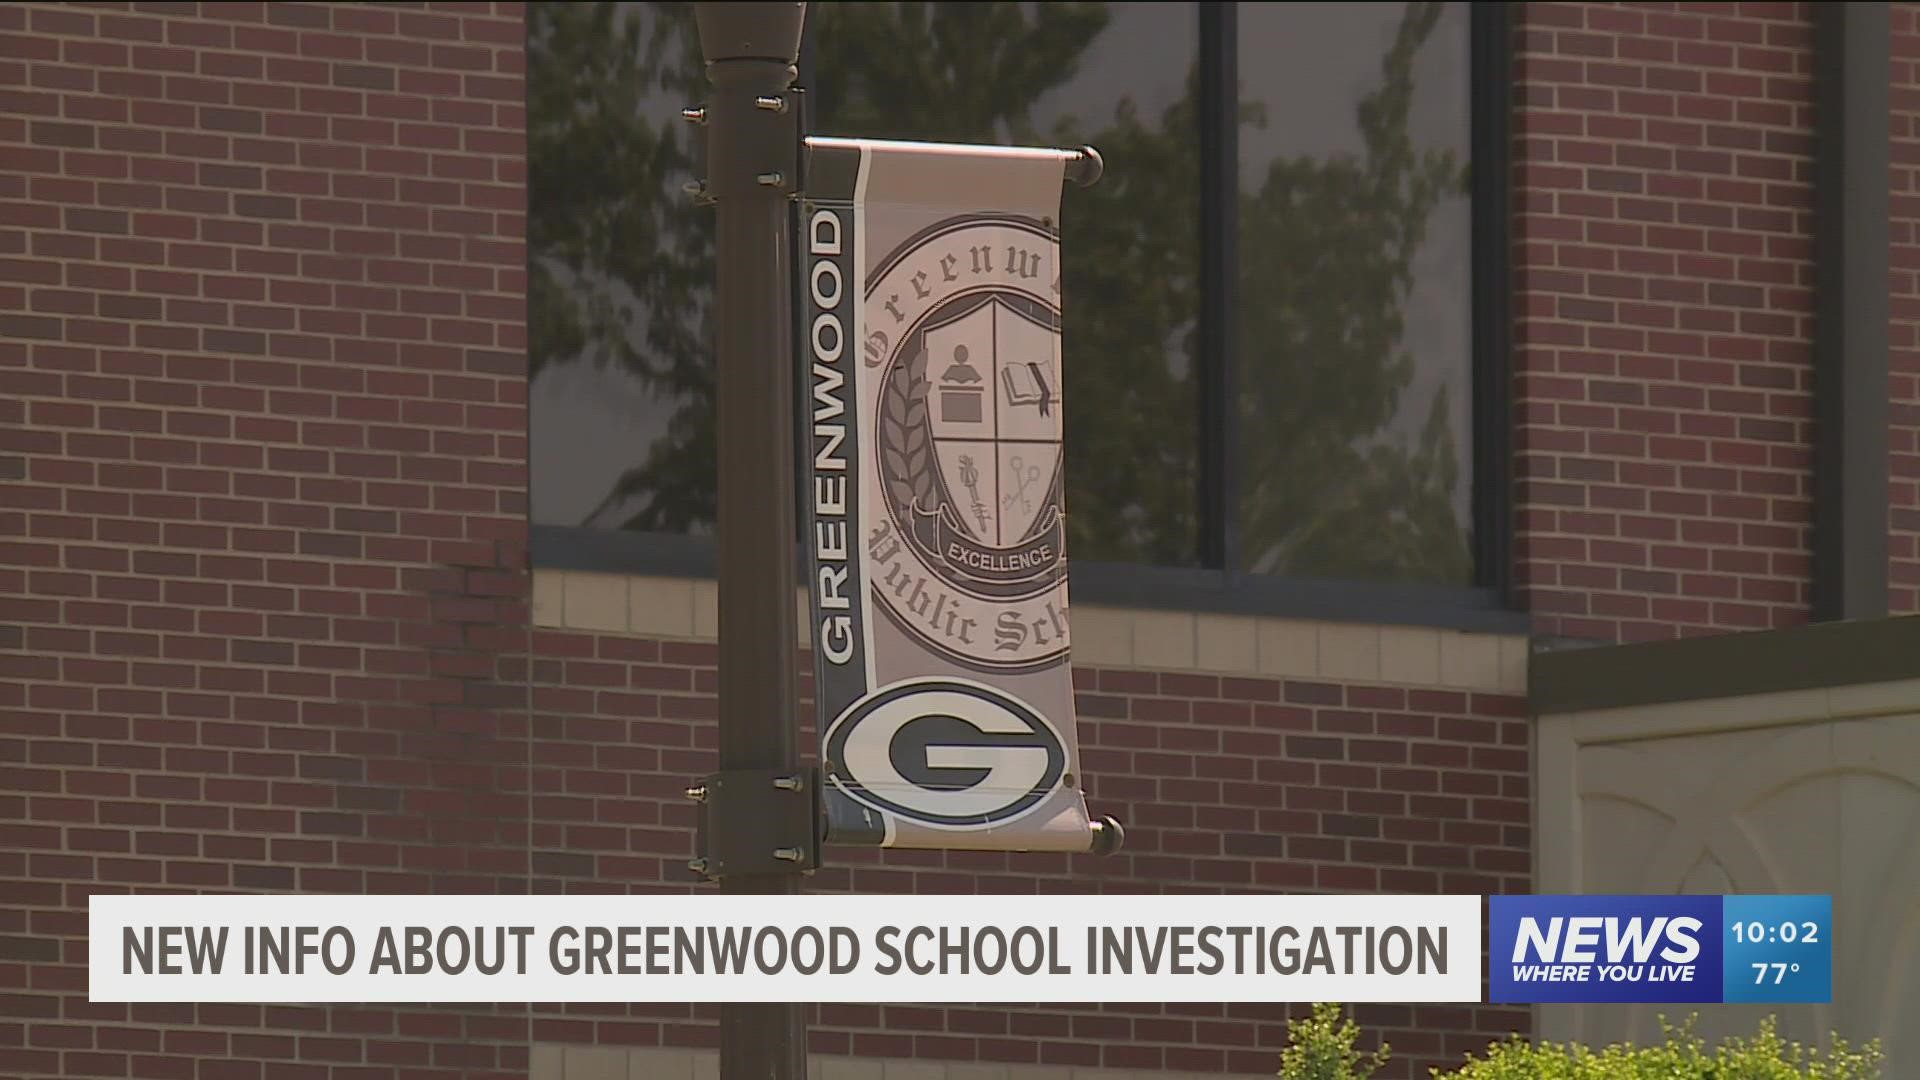 The school district says it can not comment on the investigation at this time.